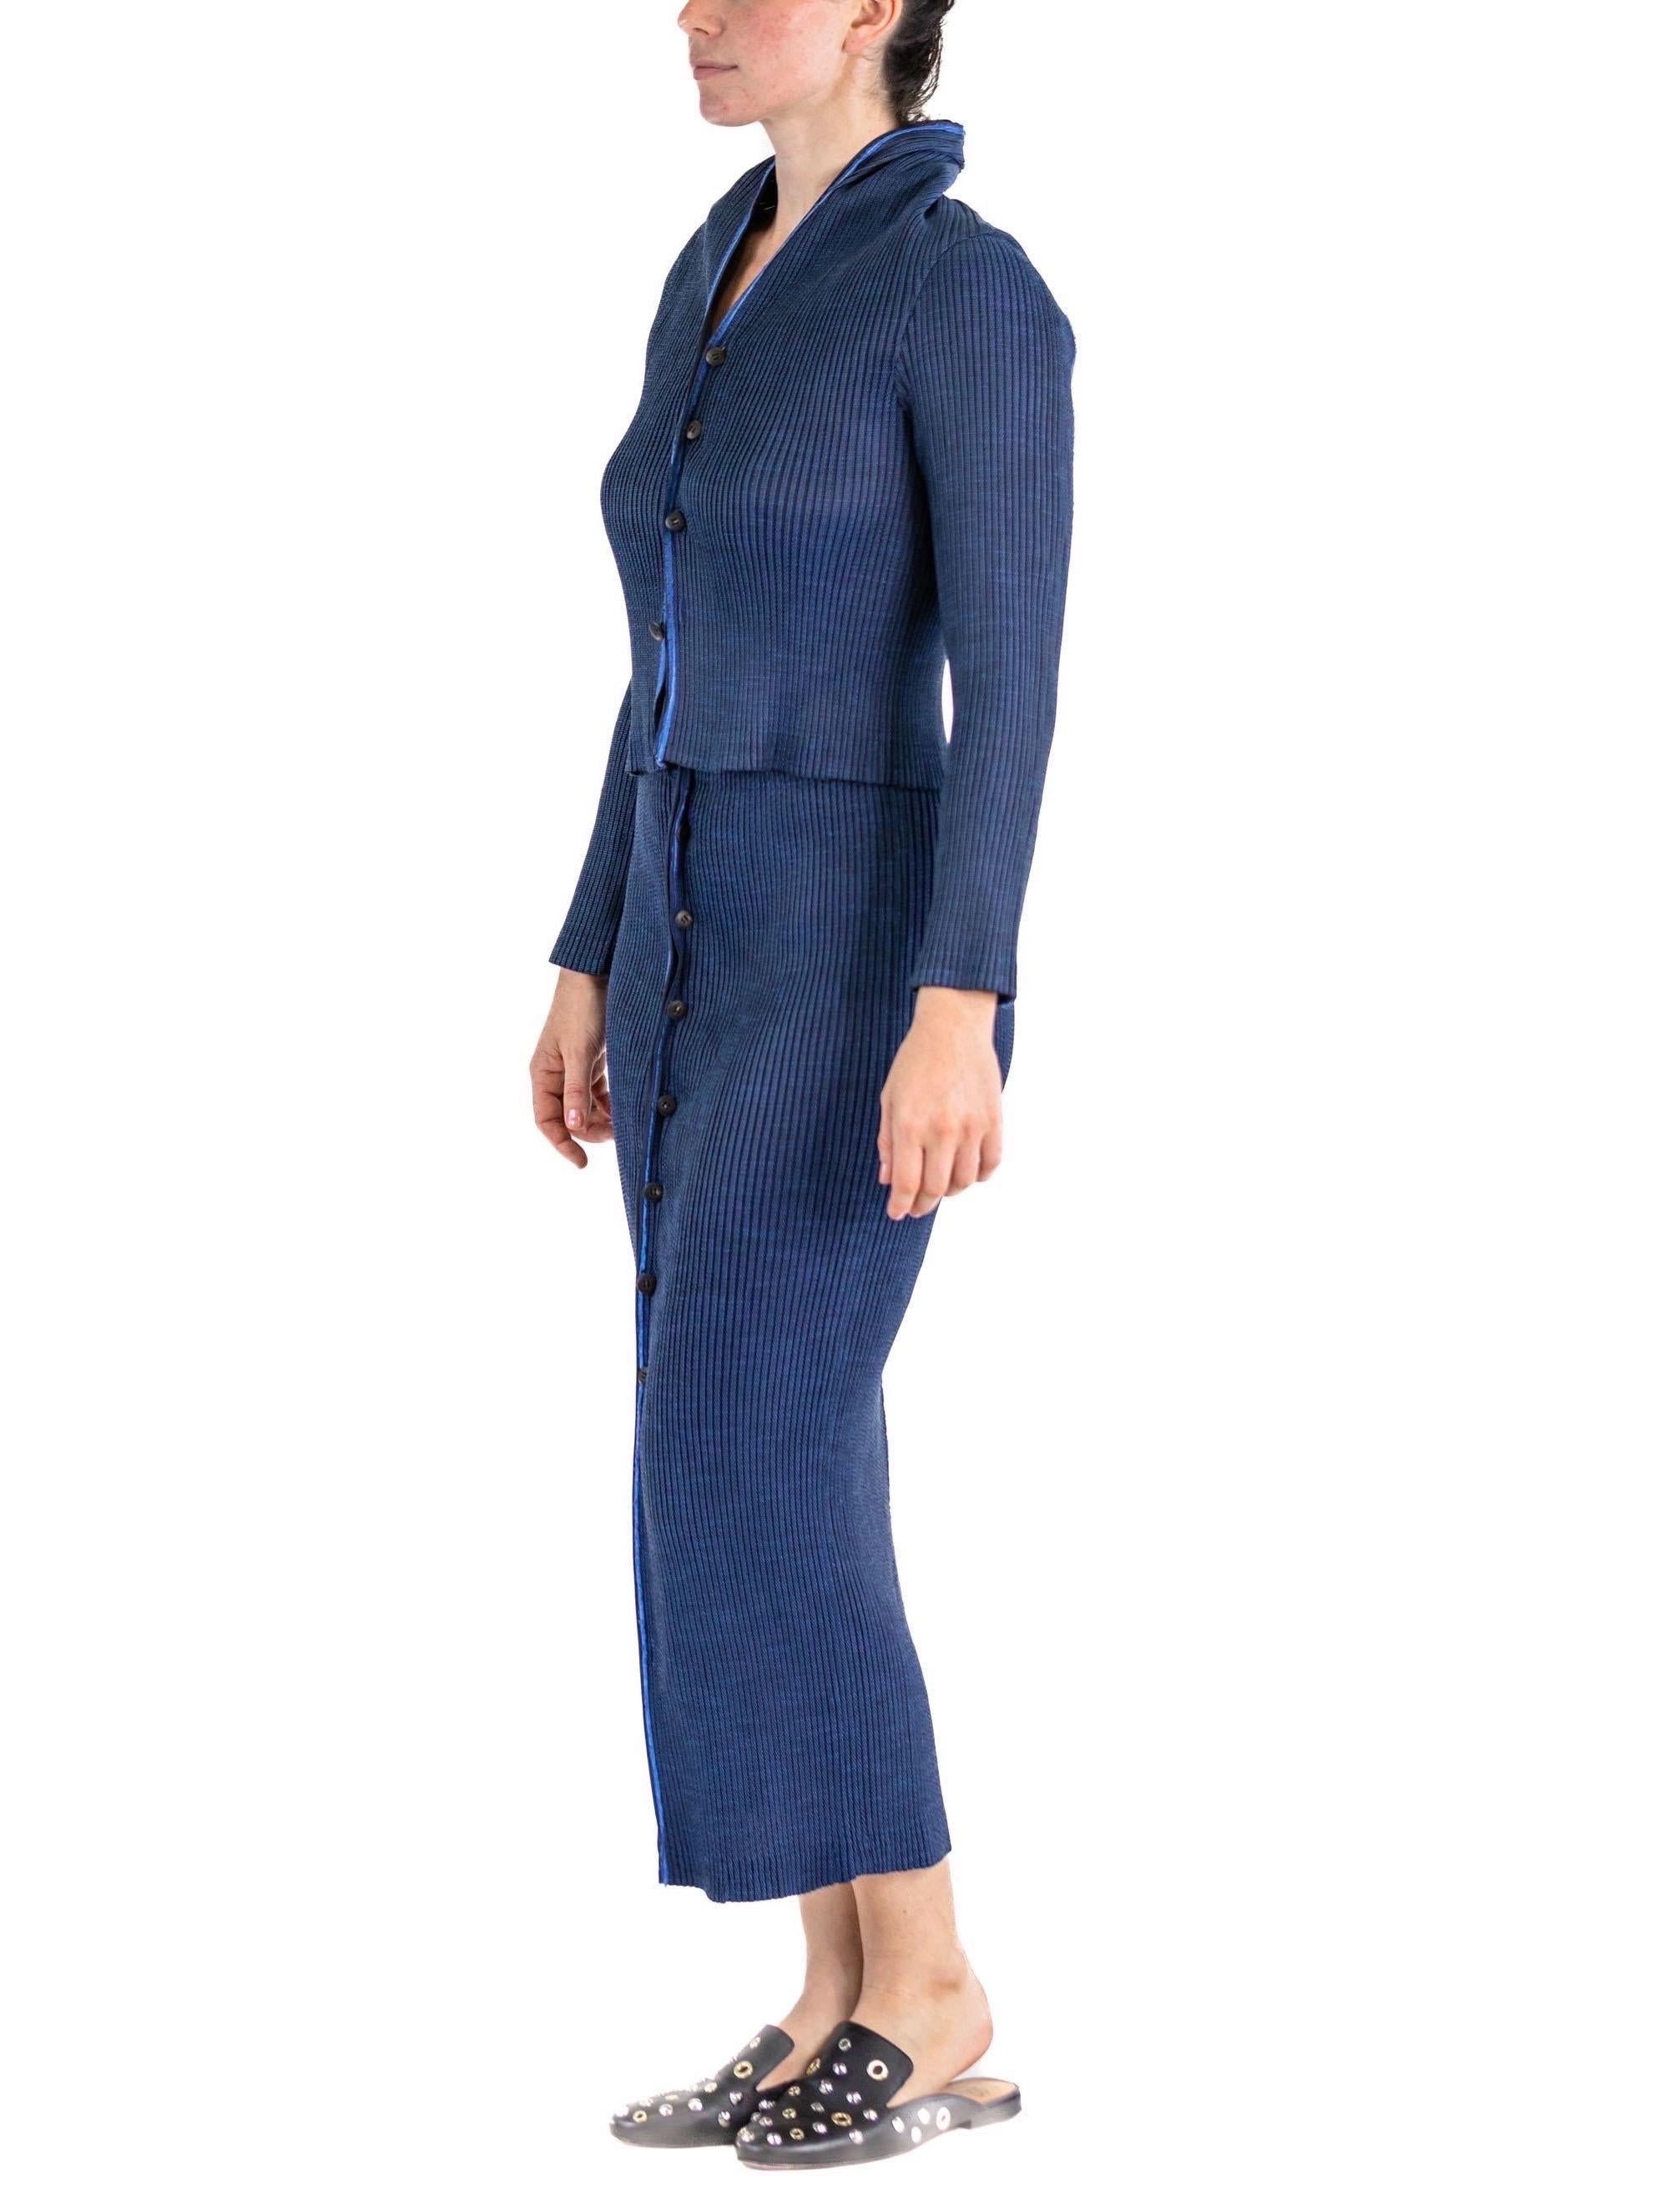 1990S ISSEY MIYAKE Blue & Black Polyester Pleated Woven Knit Skirt Suit With Bu For Sale 3